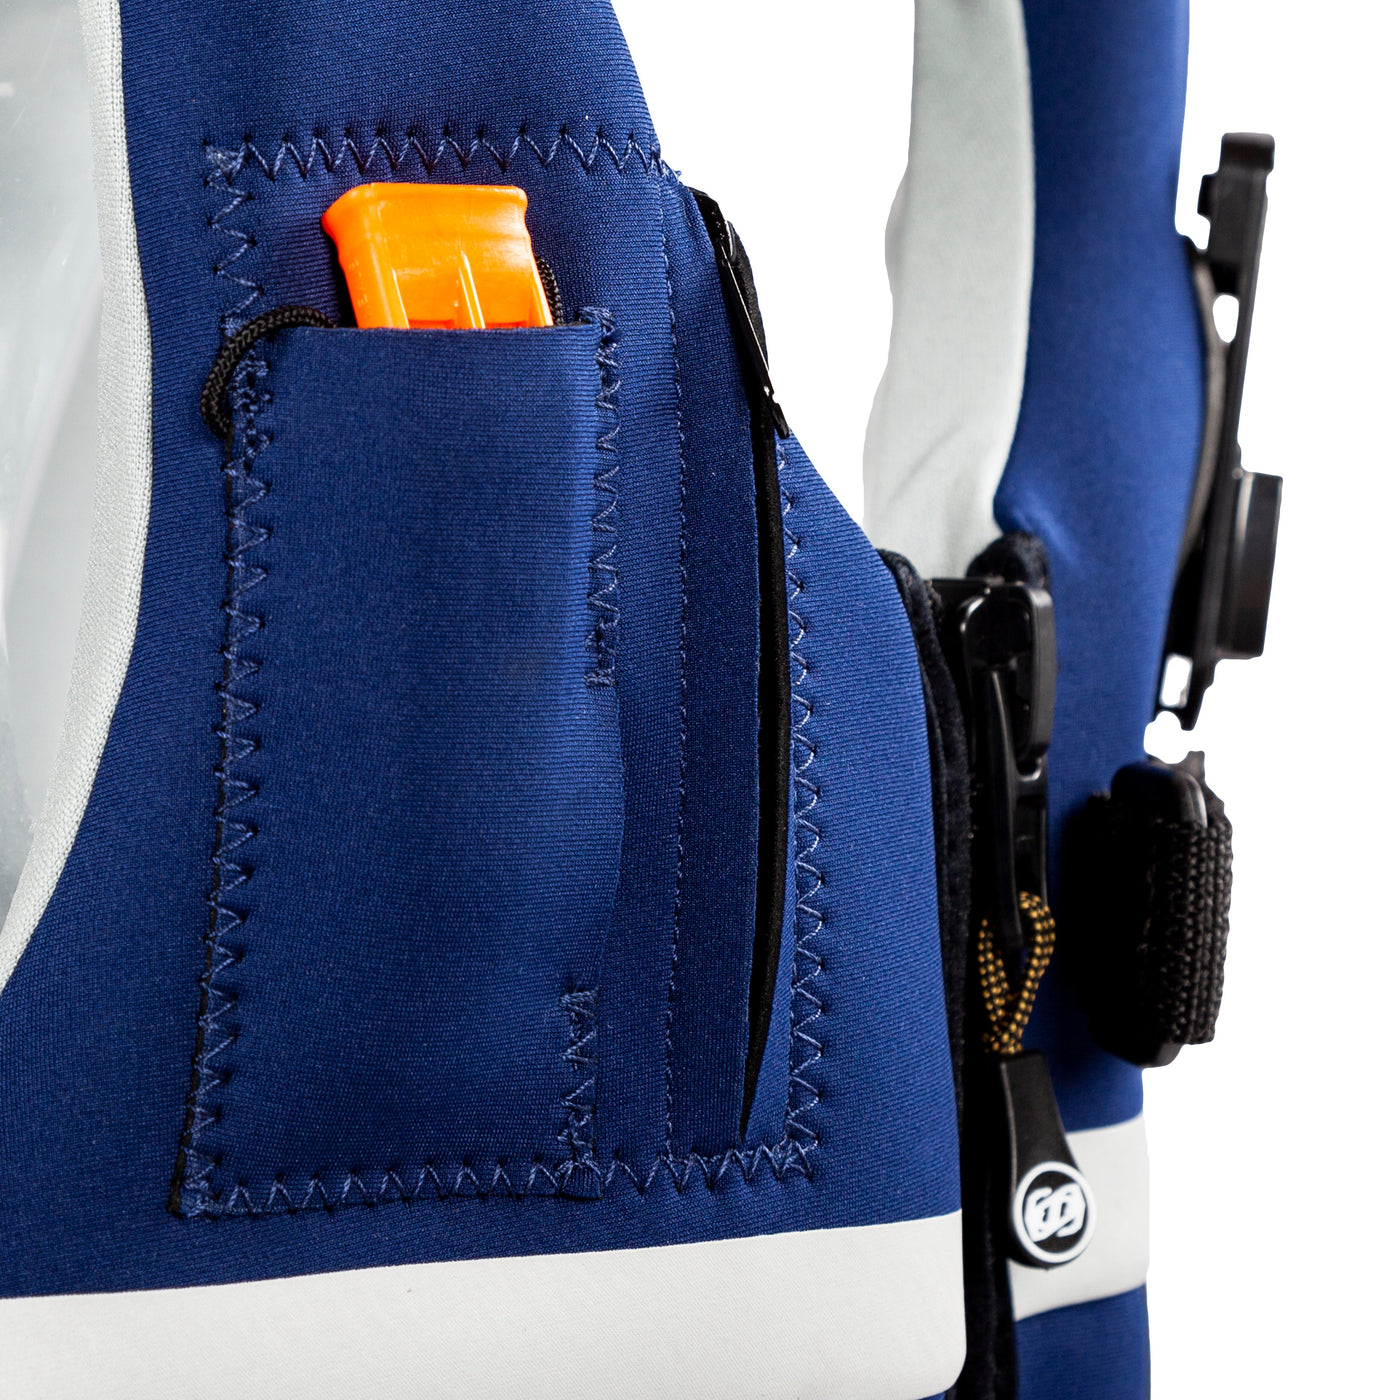 View of the whistle pocket on the Jetpilot Helmsman CGA Vest.